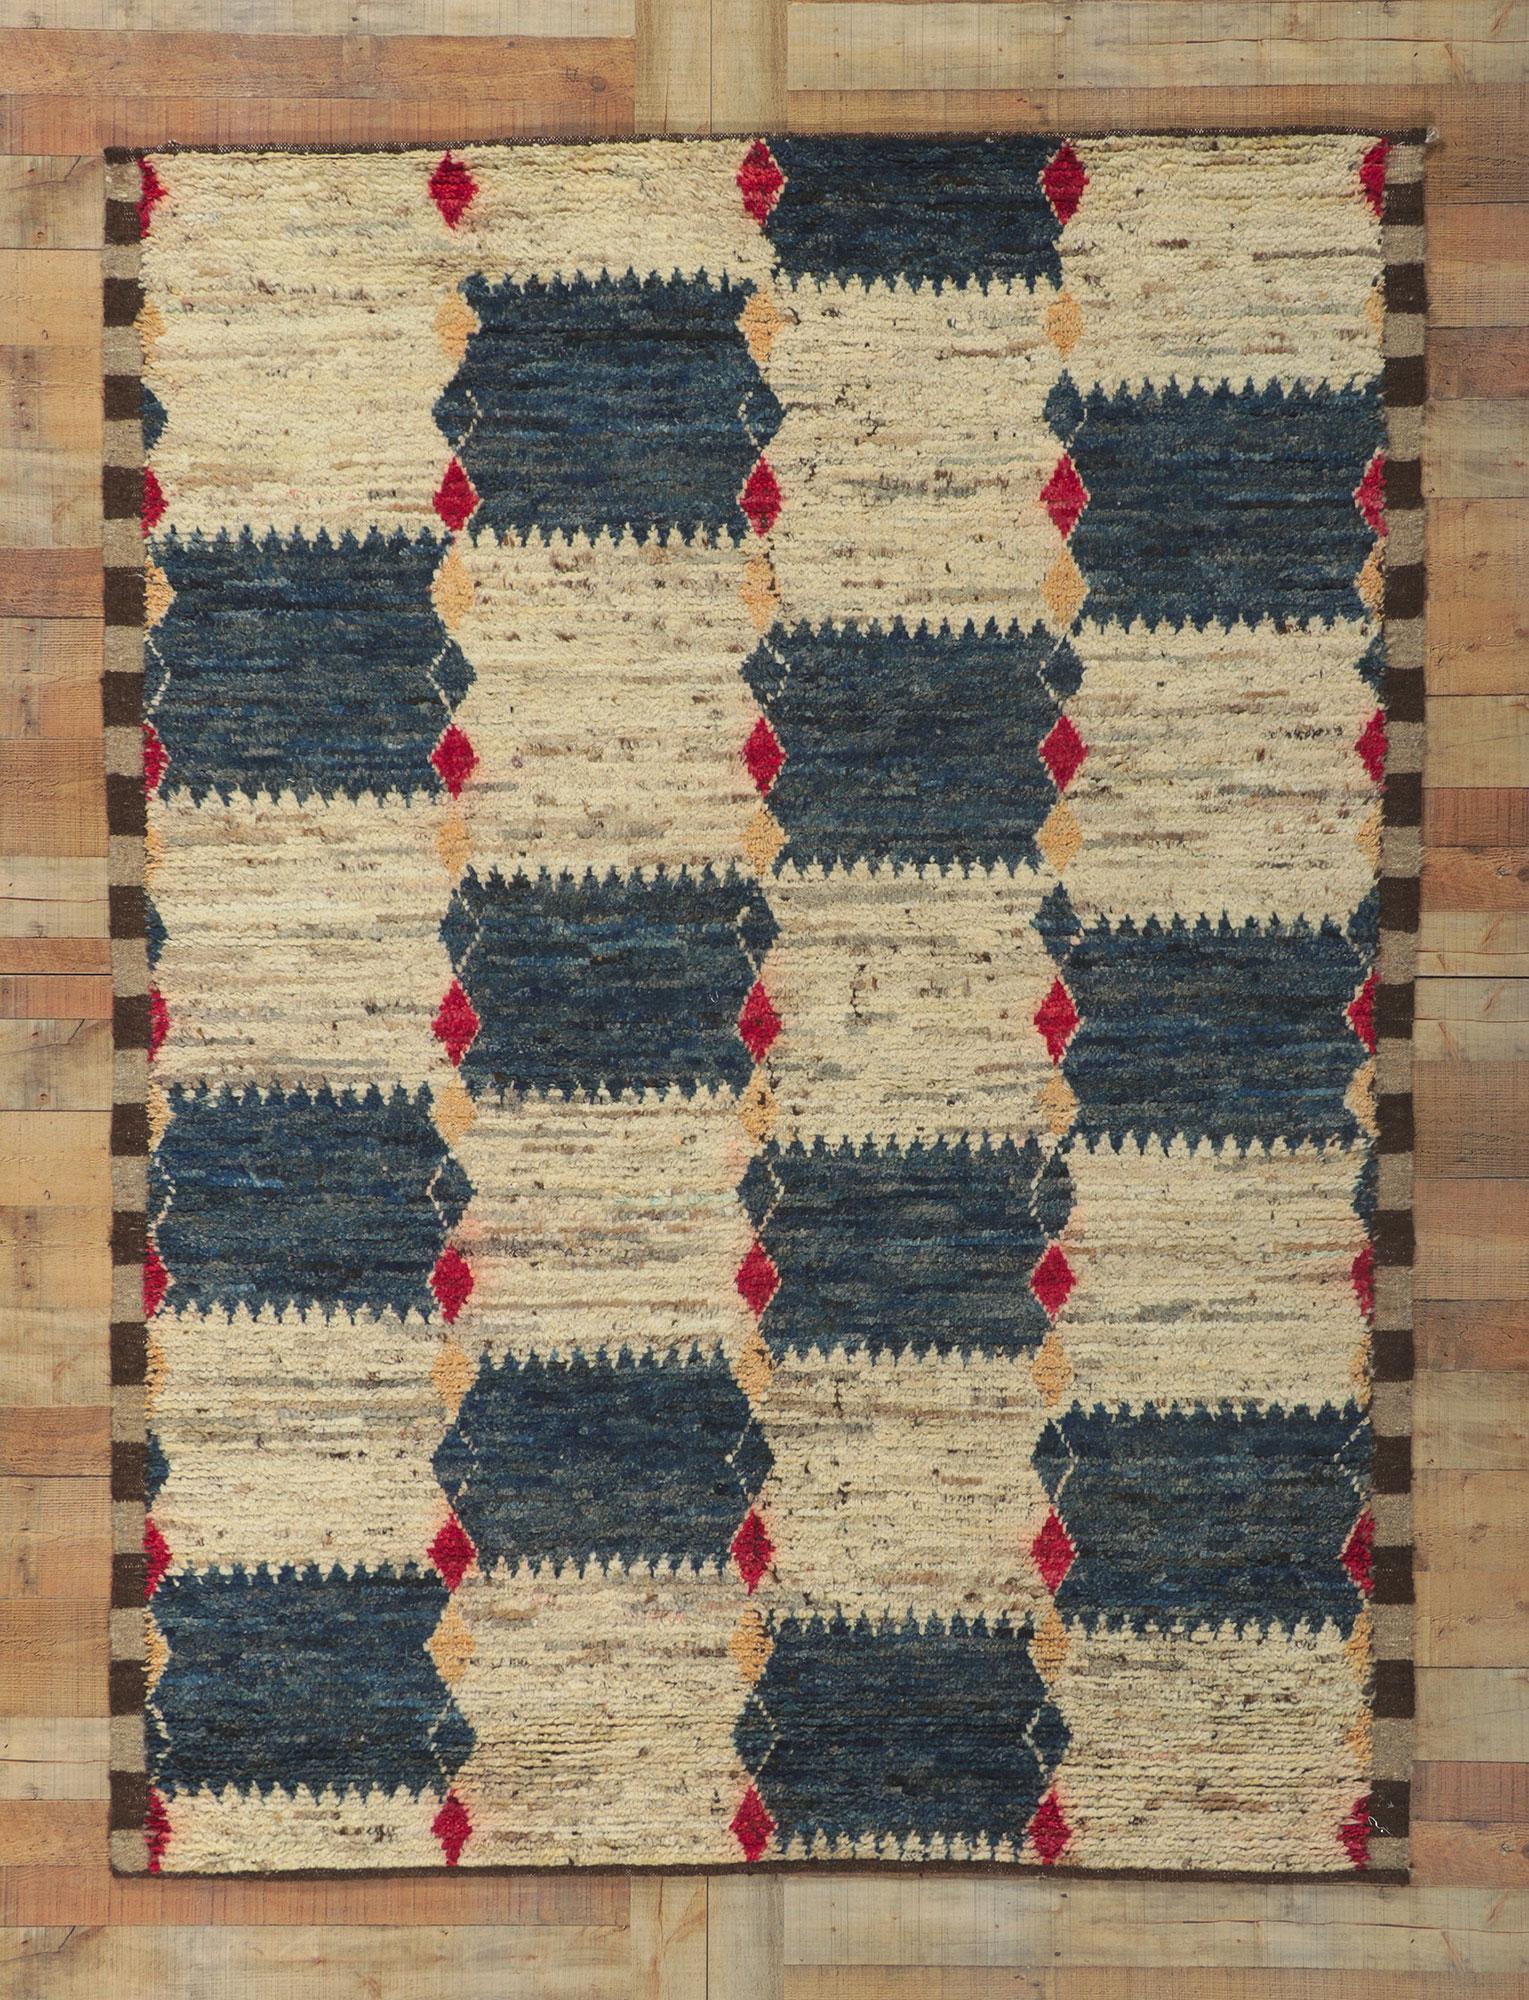 Earth-tone Checkered Moroccan Rug, Midcentury Modern Meets Tribal Enchantment For Sale 1